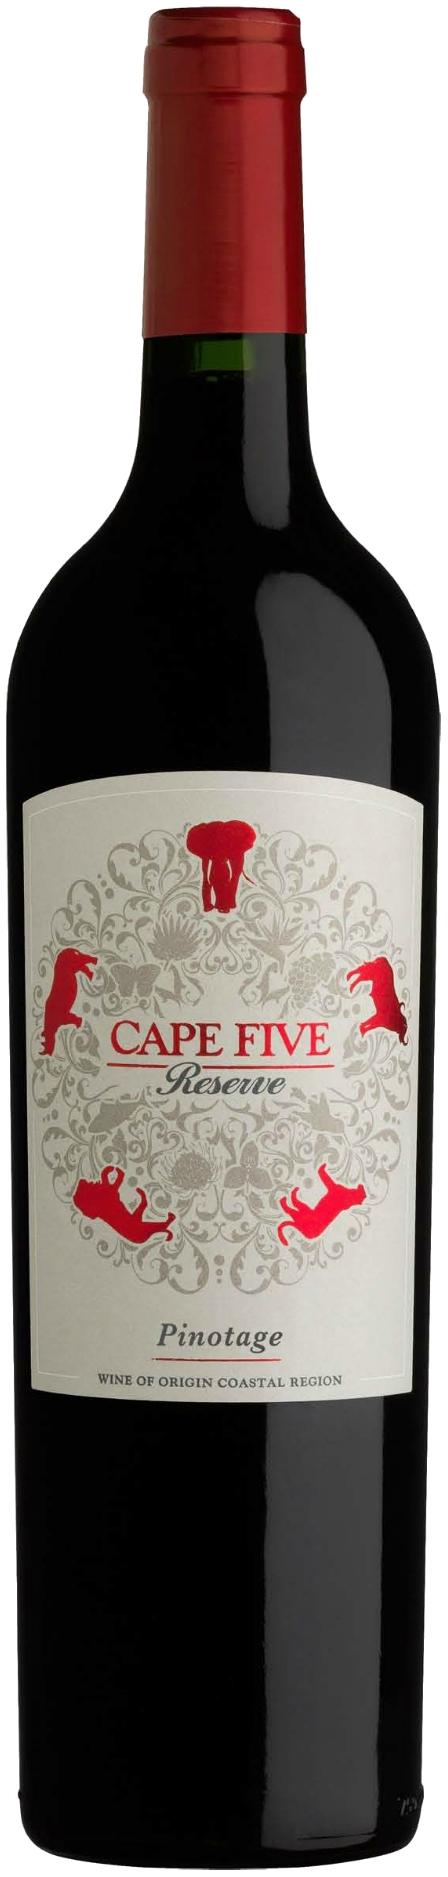 Stellenview Cape Five Reserve Pinotage 2020